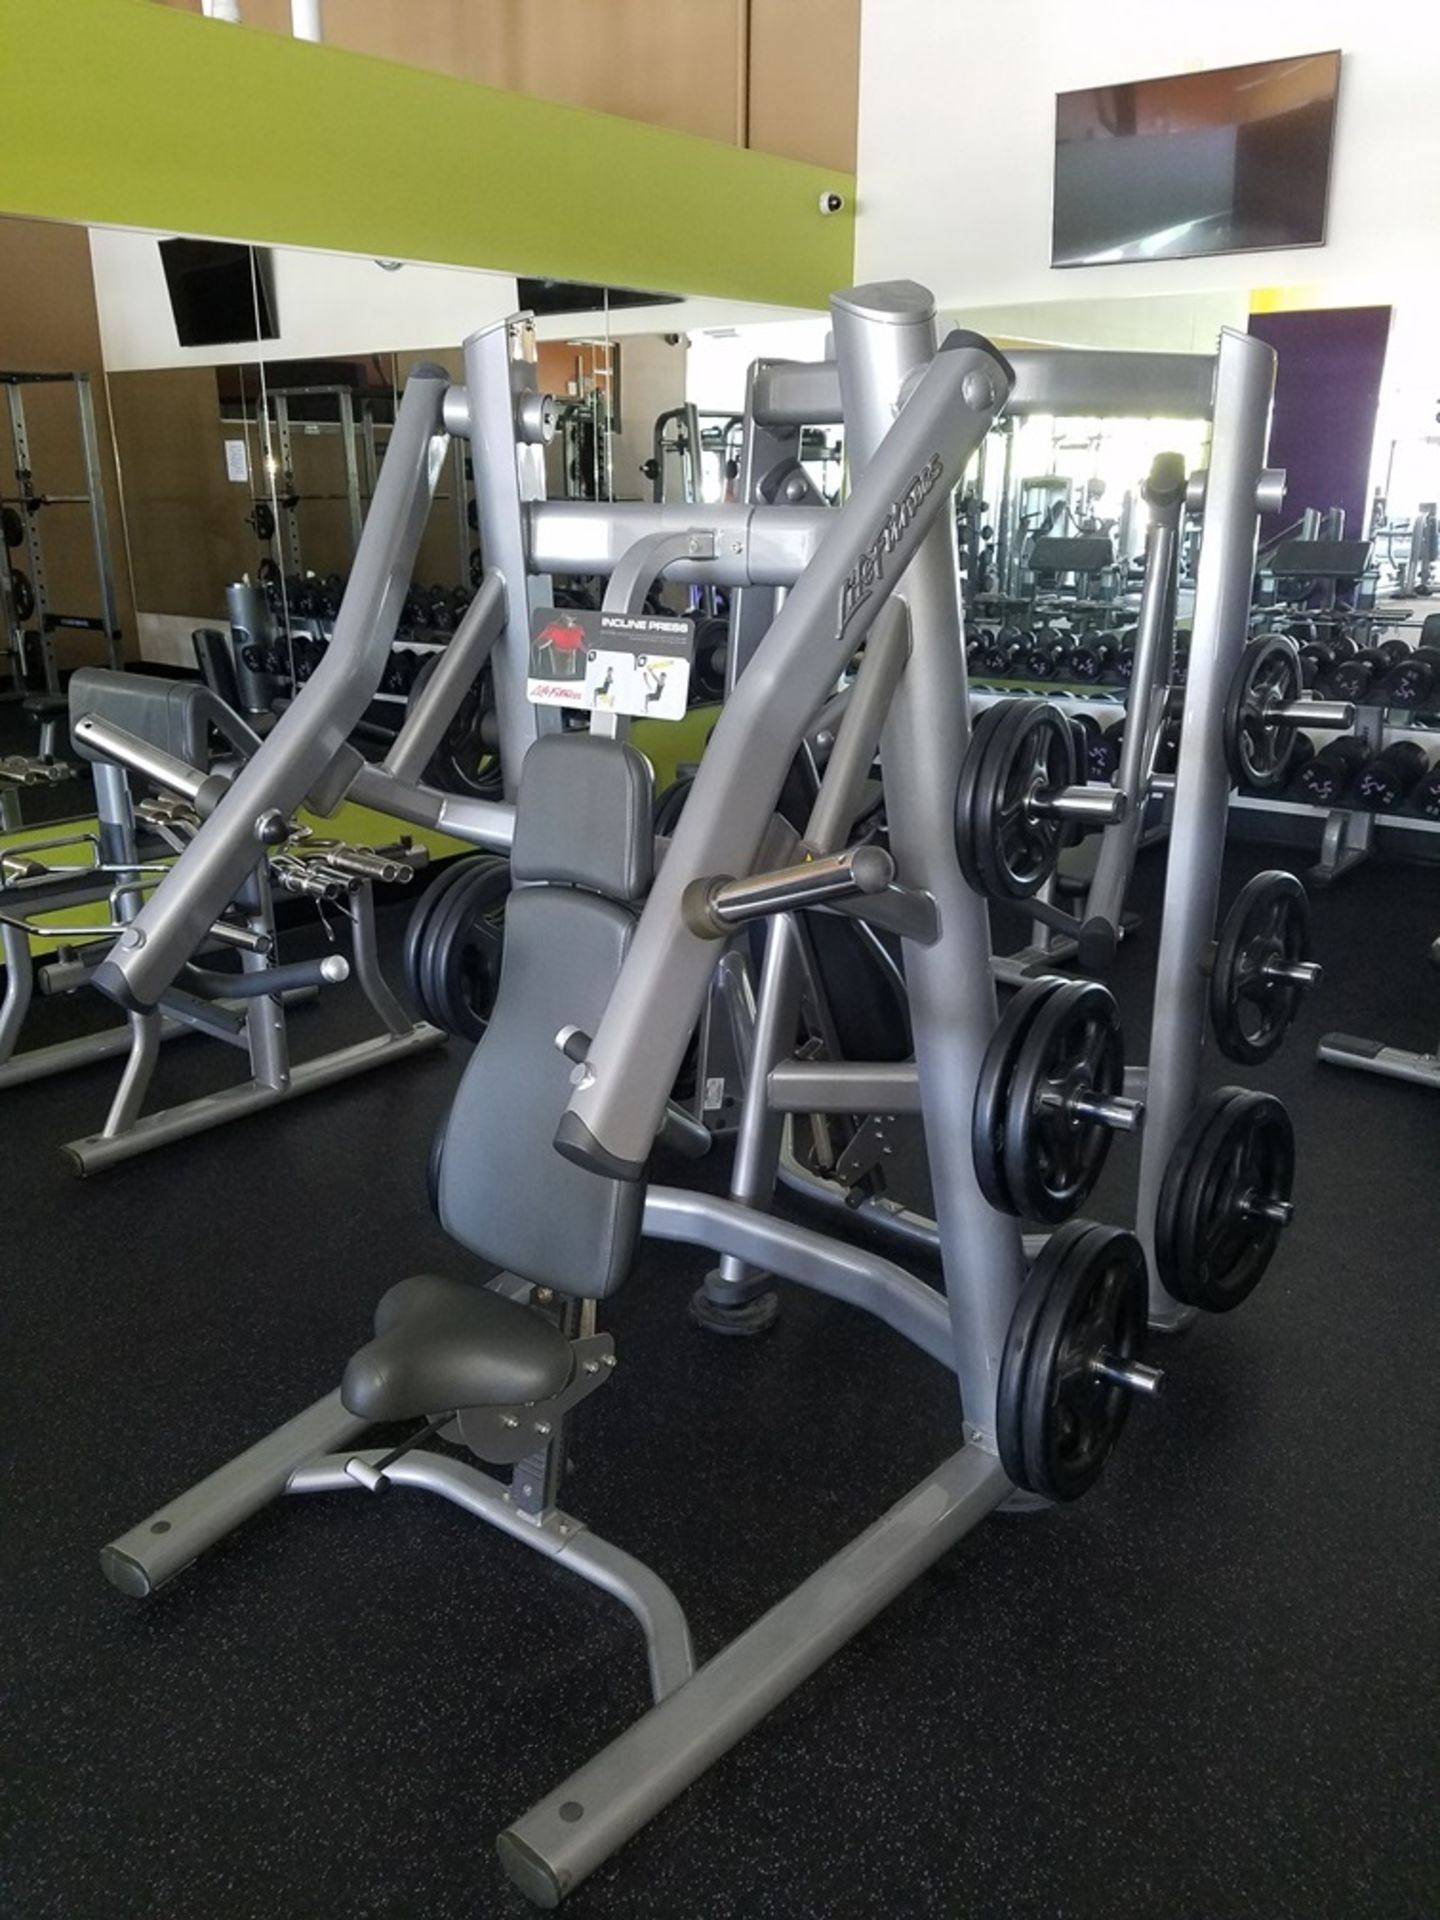 Complete Gym sold as one unit. 10,000 dollar minimum opening bid. - Image 26 of 91